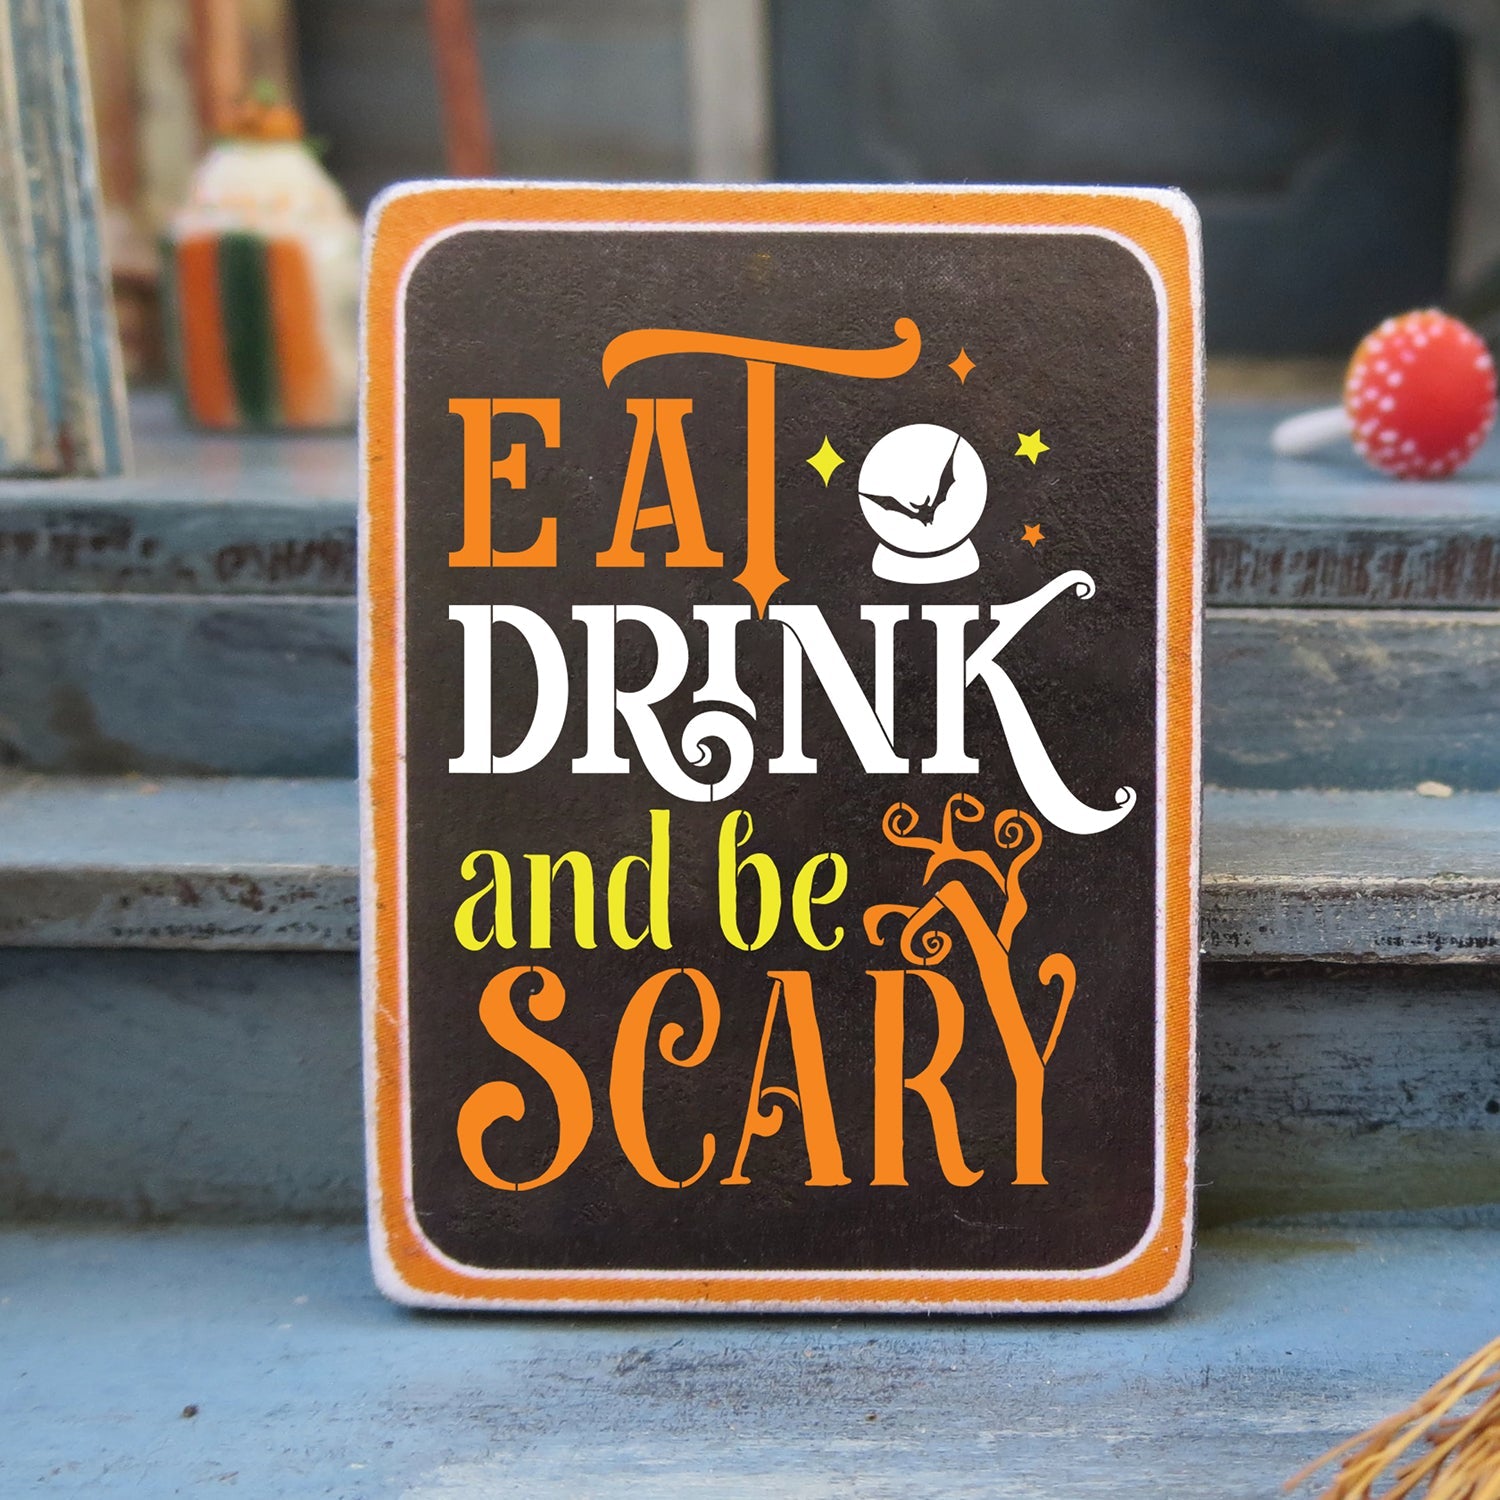 diy reusable halloween farmhouse wood sign stencils, eat drink and be scary wood sign stencil, home sweet haunted home wood sign stencil, diy halloween signs, halloween stencil cut outs, halloween crafts